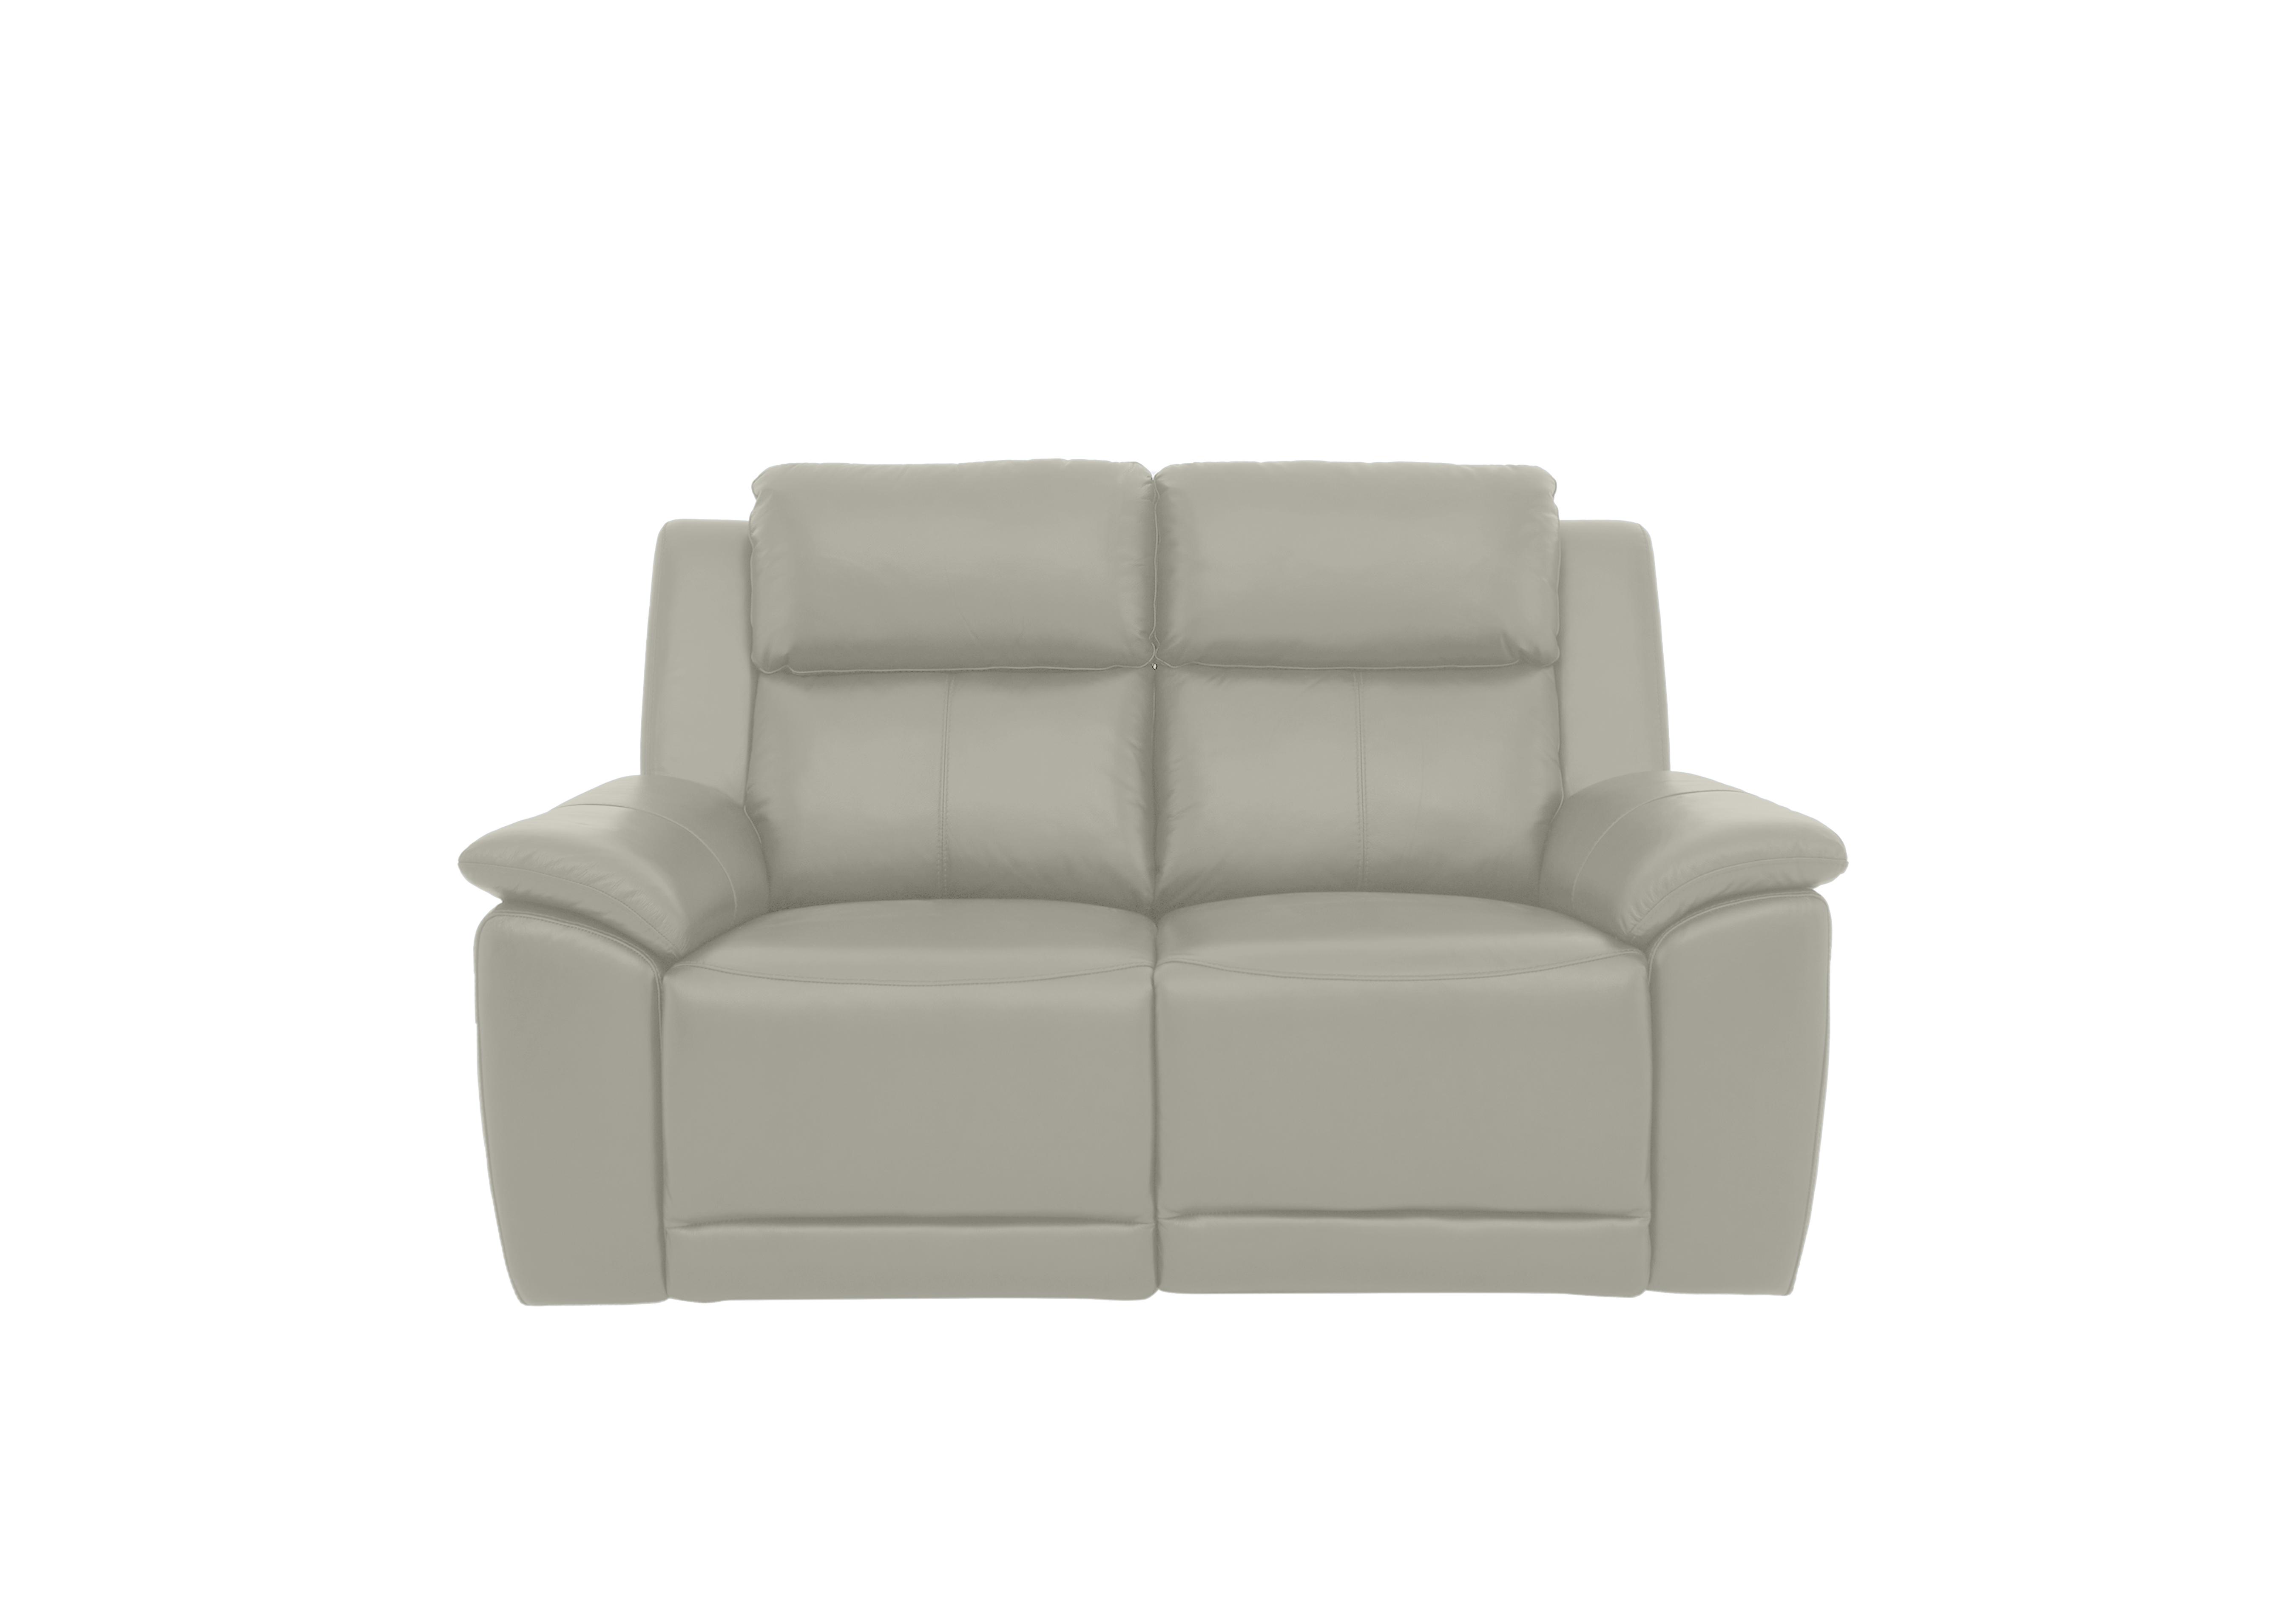 Utah 2 Seater Leather Power Recliner Sofa with Power Headrests and Power Lumbar in Sand Le-9303 on Furniture Village